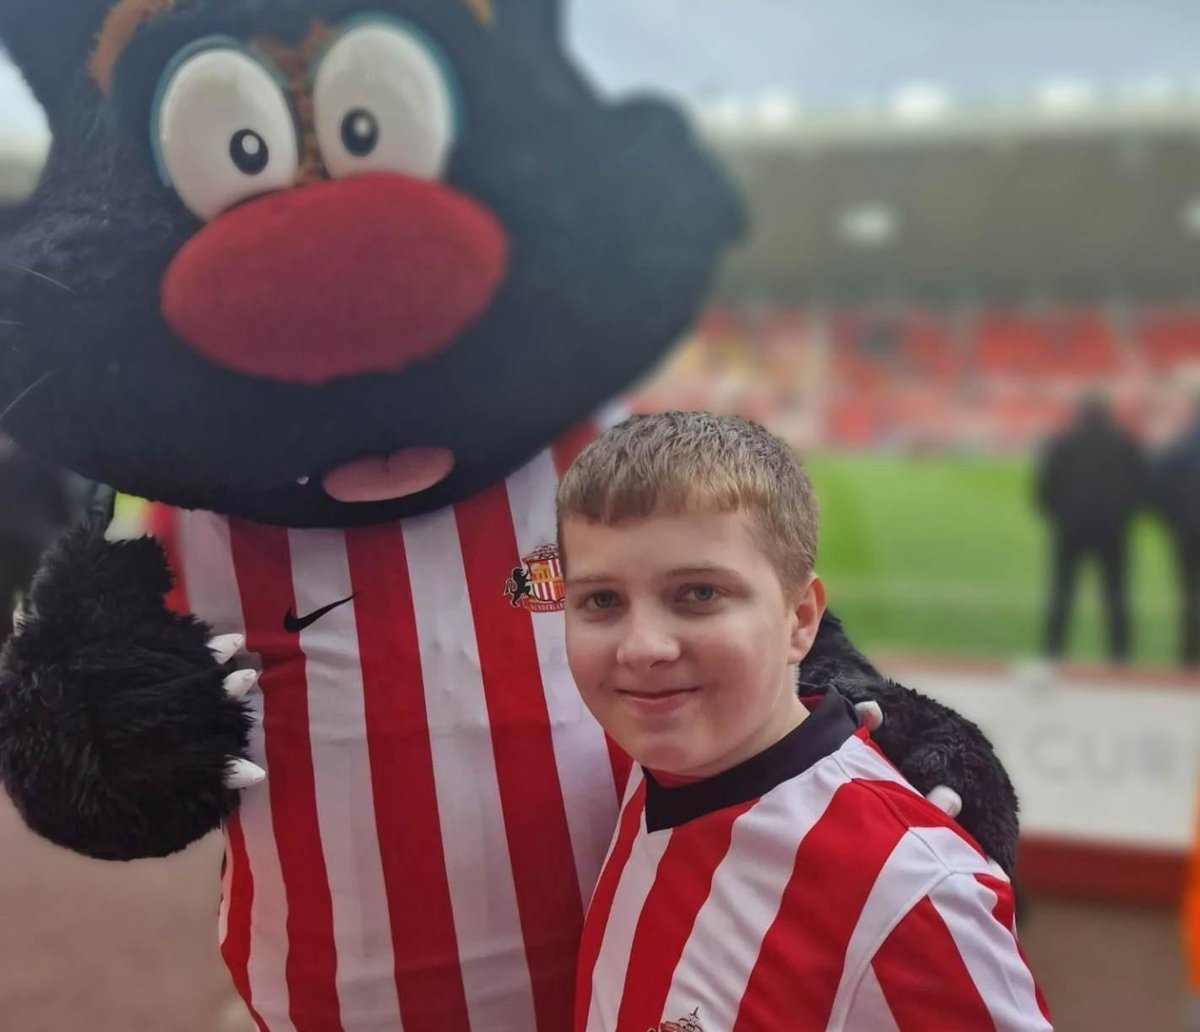 Mum of autistic boy thanks Sunderland AFC and acting captain Danny Batth for making him feel ‘like he was part of the team’